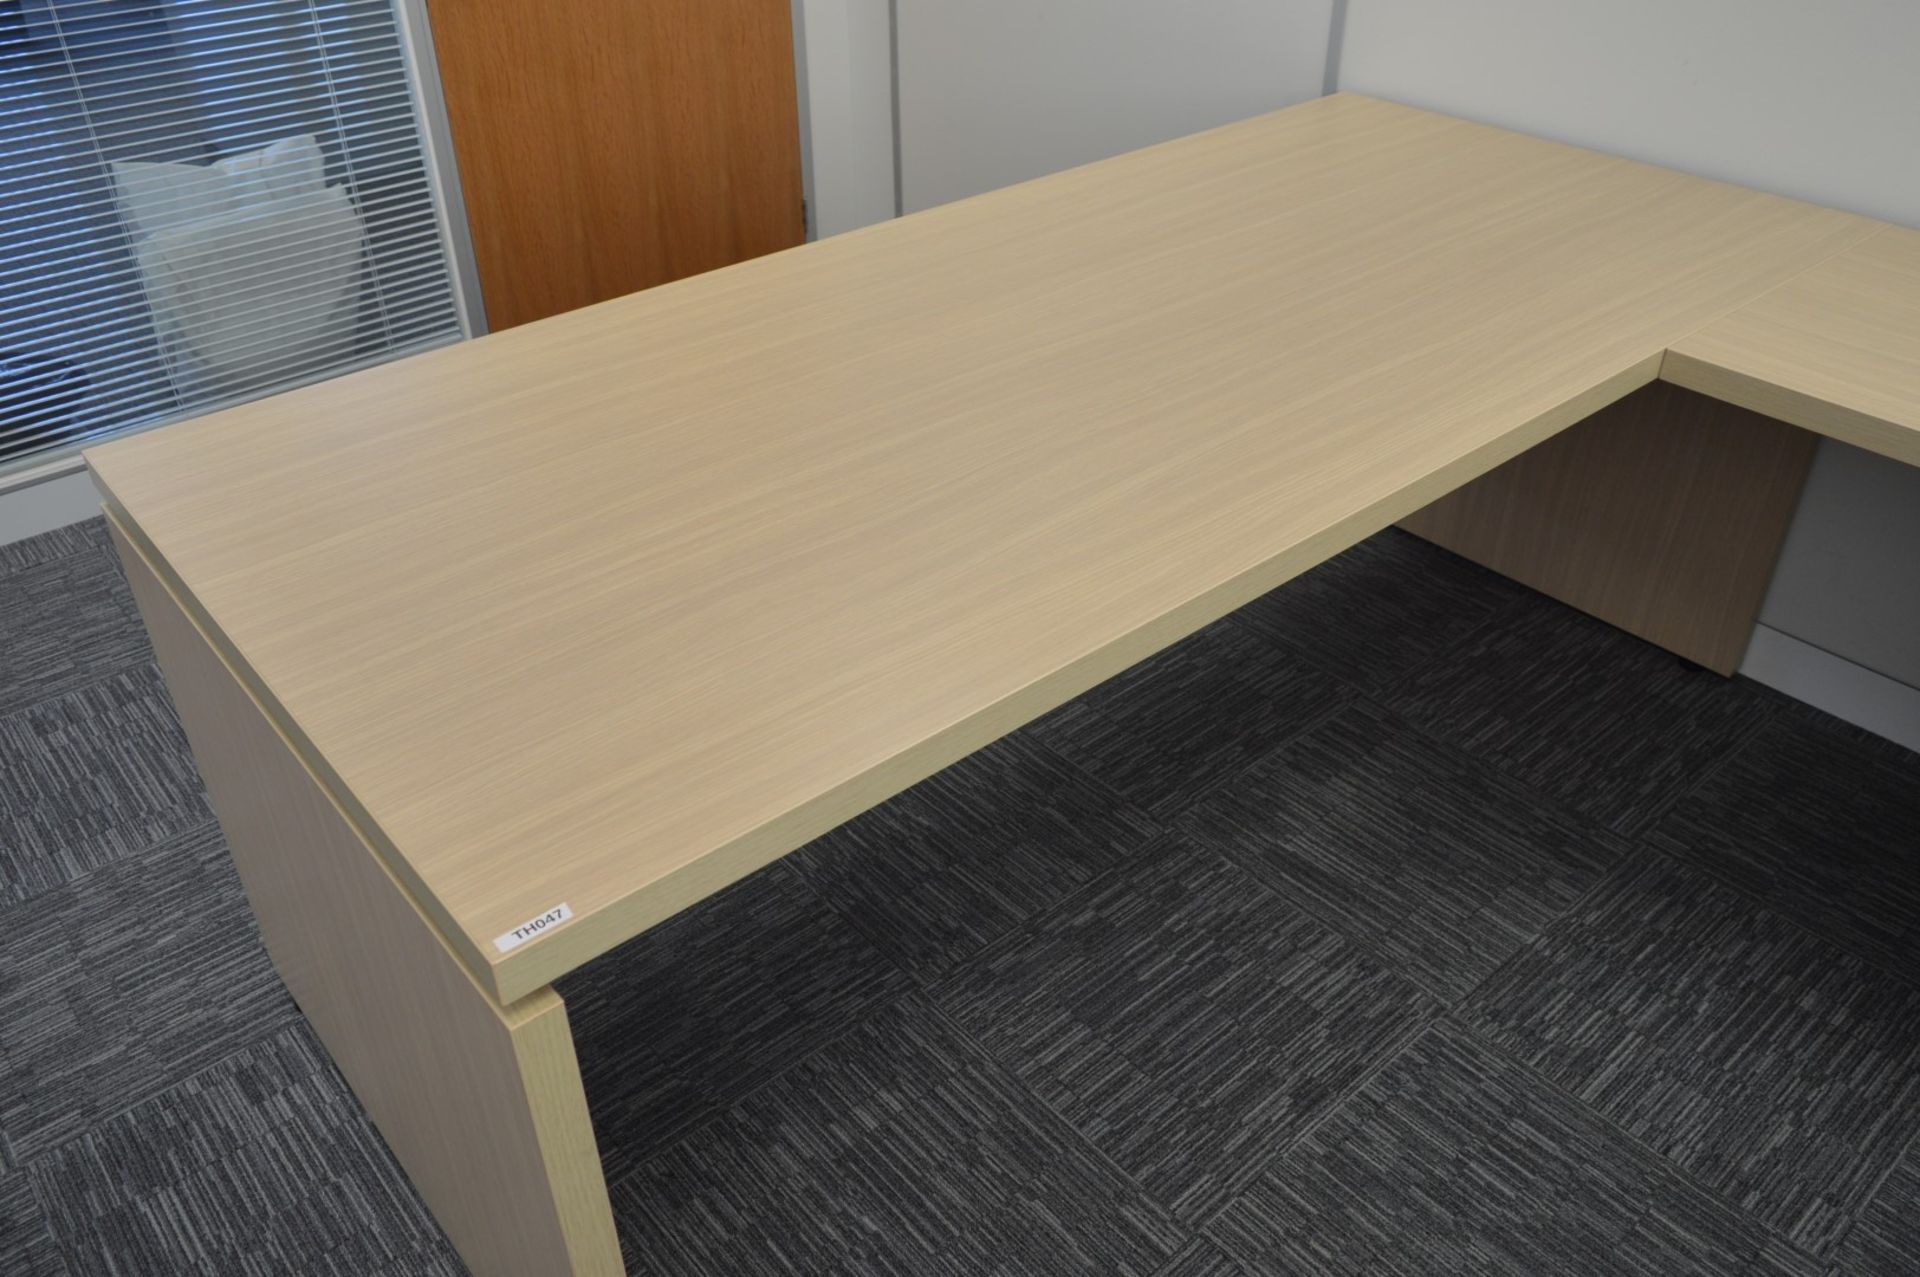 1 x Babini Executives Office Desk With Three Drawer Pedestal and Side Table - Attractive Finish With - Image 2 of 9